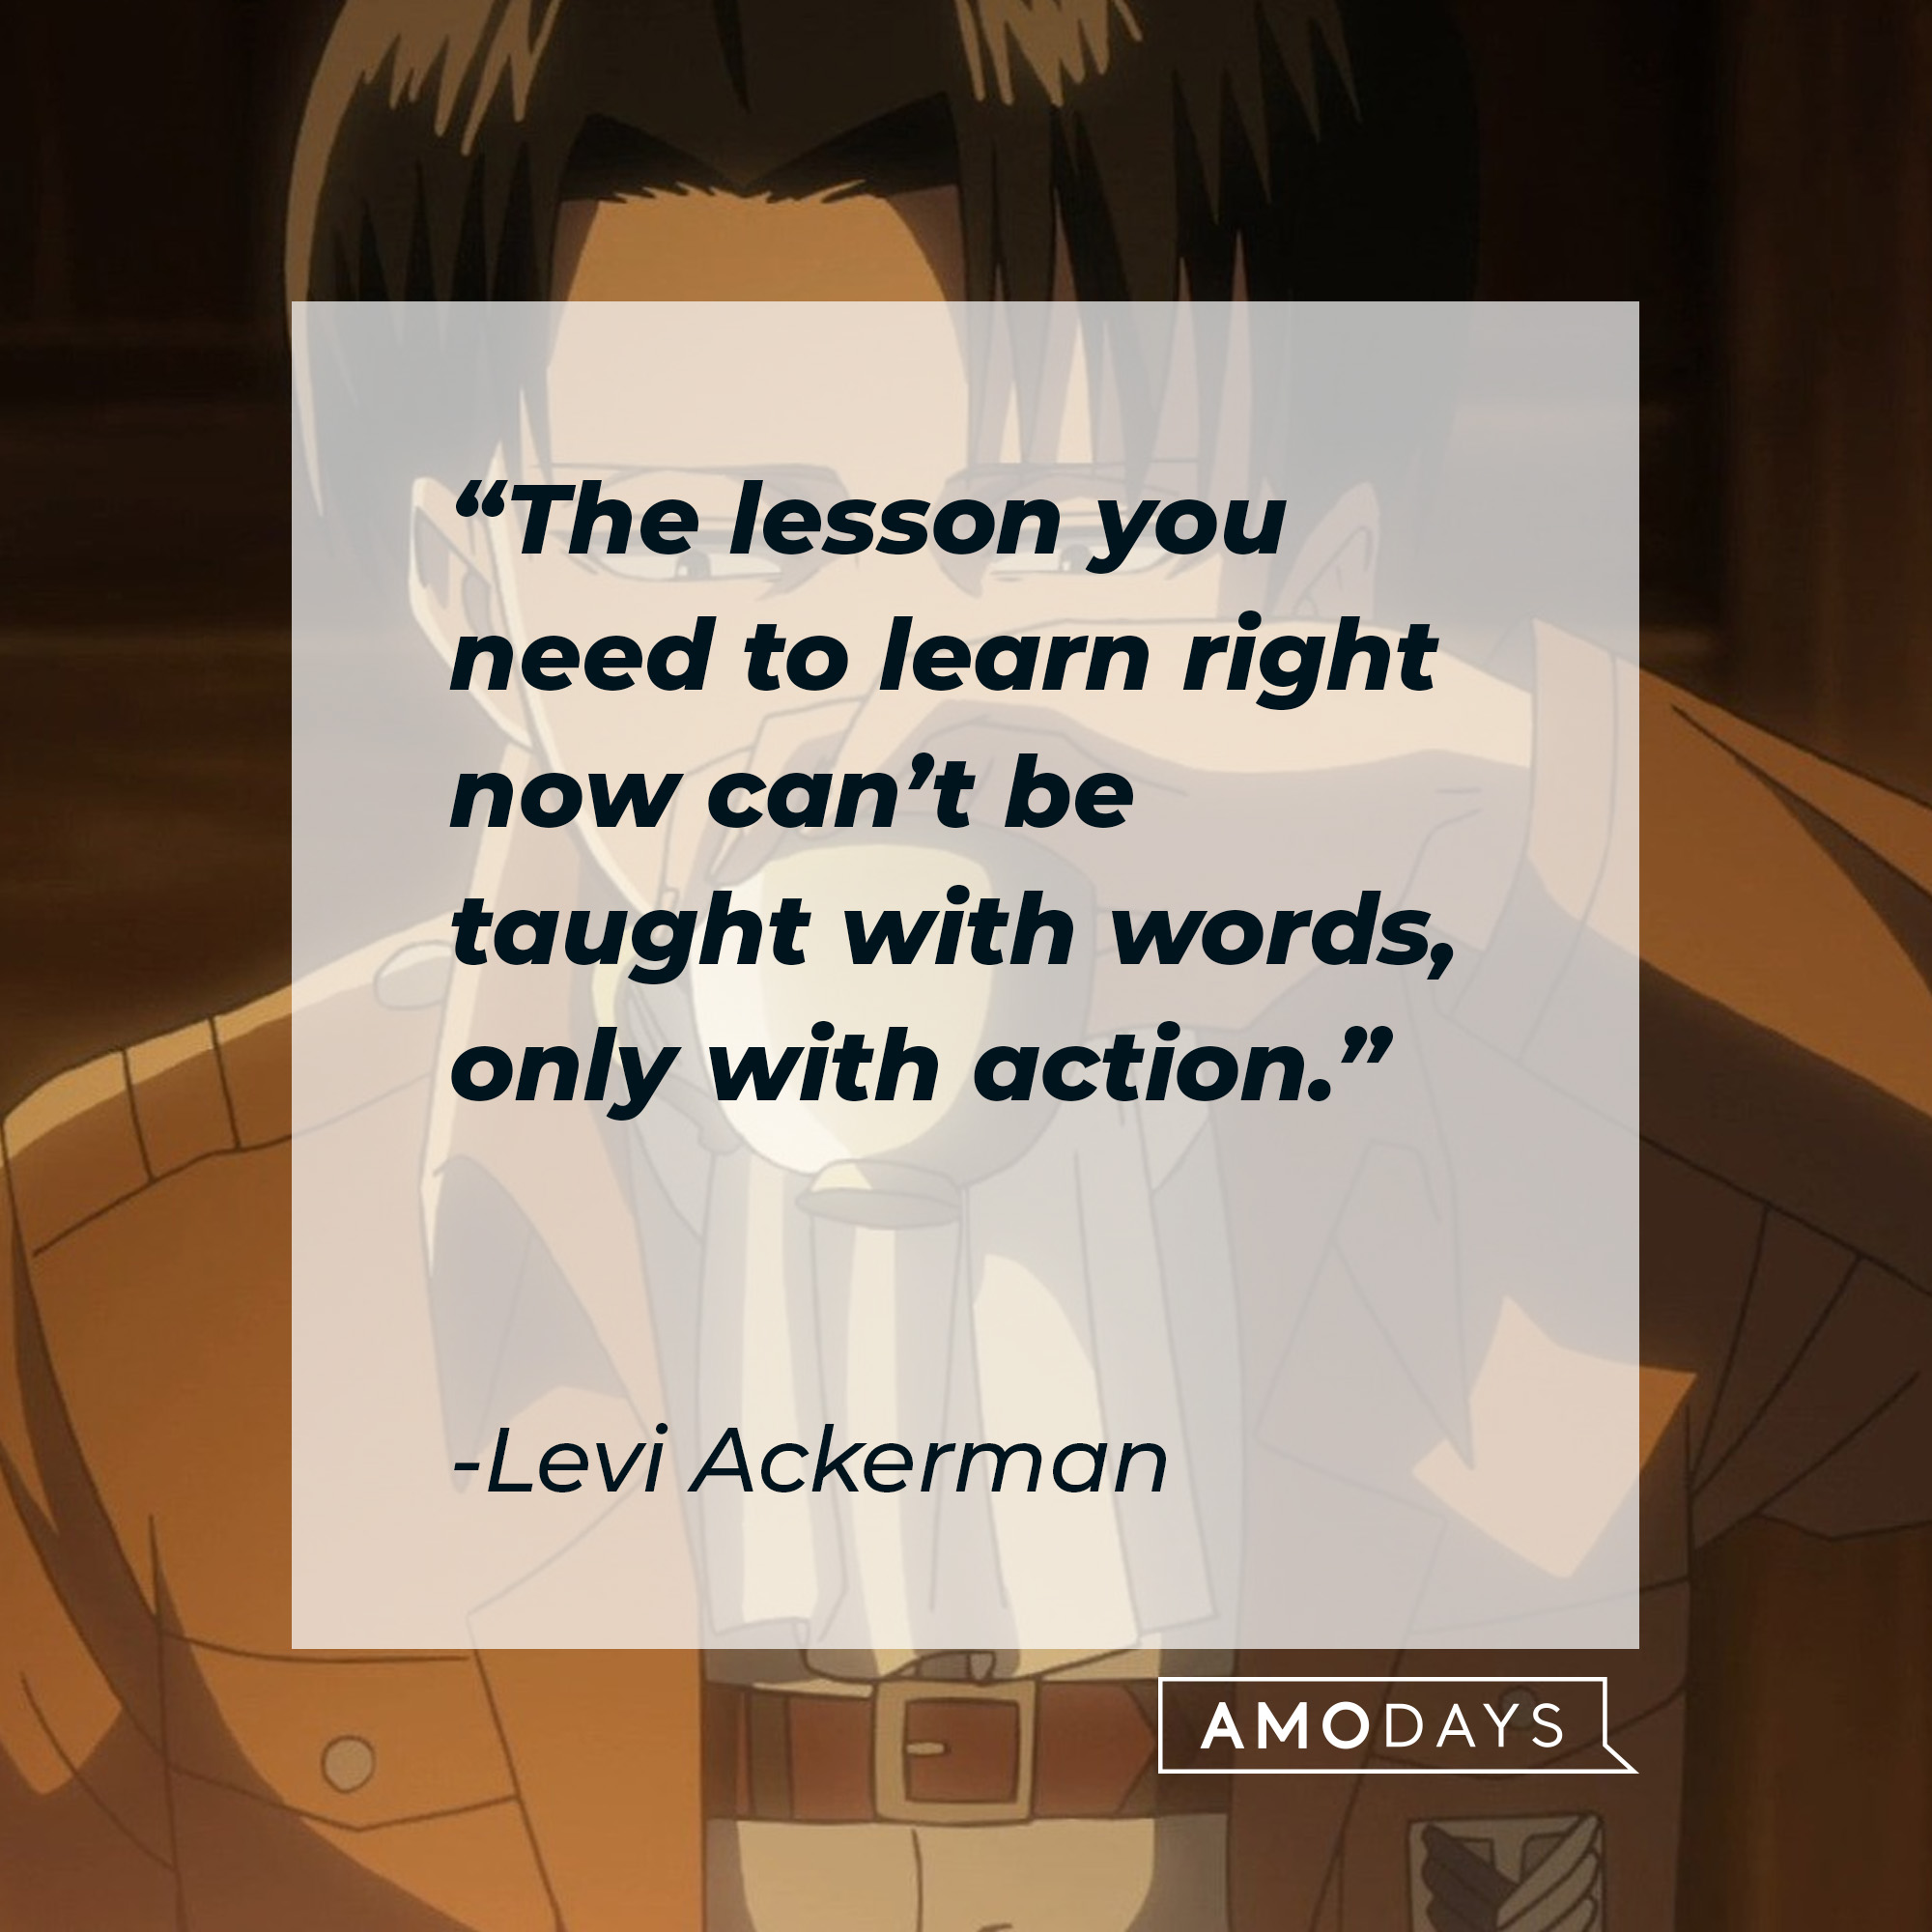 Levi Ackerman, with his quote: “The lesson you need to learn right now can’t be taught with words, only with action.” │ Source: facebook.com/AttackOnTitan